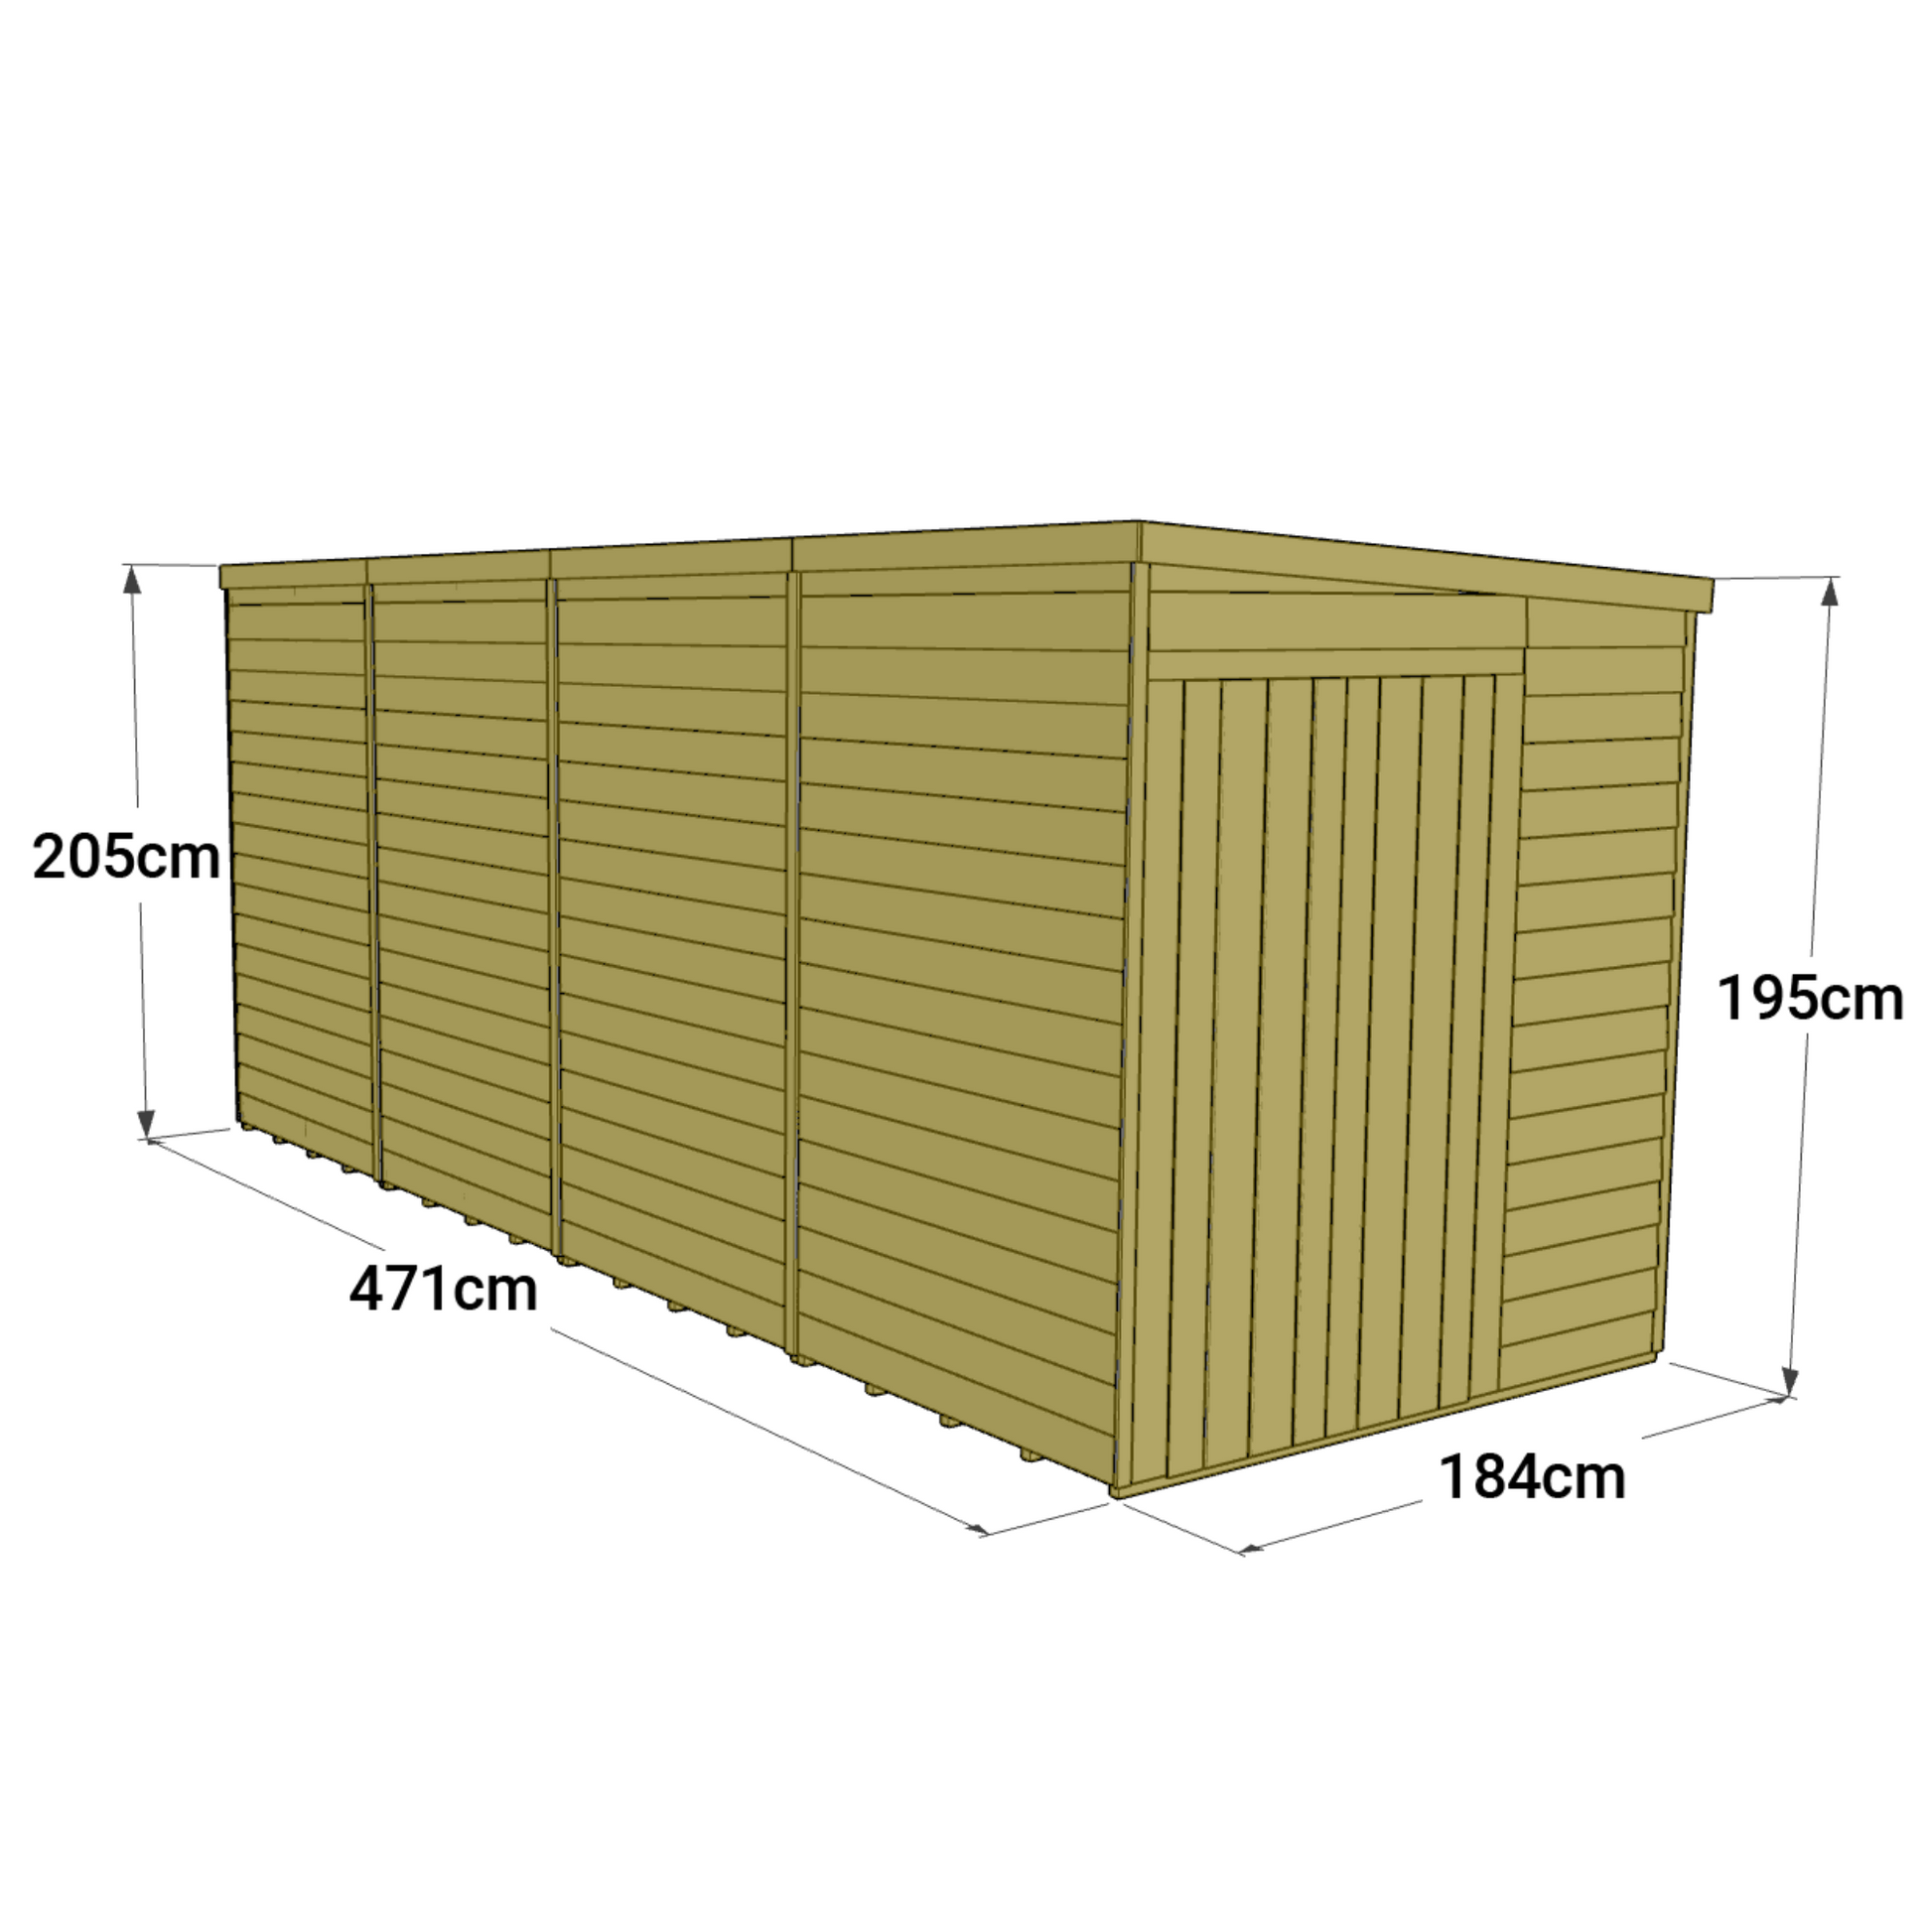 Store More 16 x 6 Tongue and Groove Pent Shed - Premium Garden